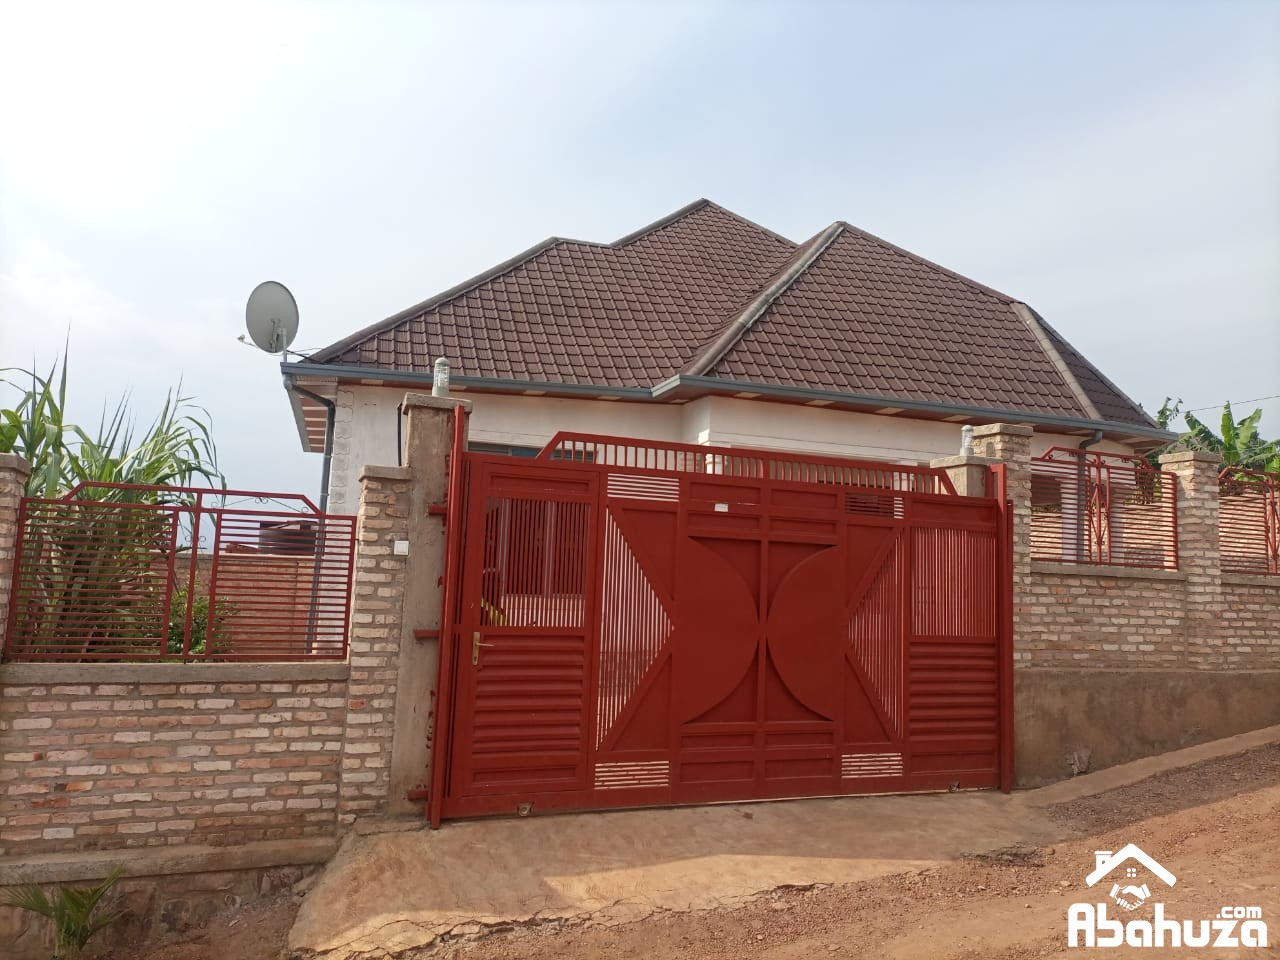 A 5 BEDROOM HOUSE FOR SALE IN KIGALI AT GATUNGA-GASANZE